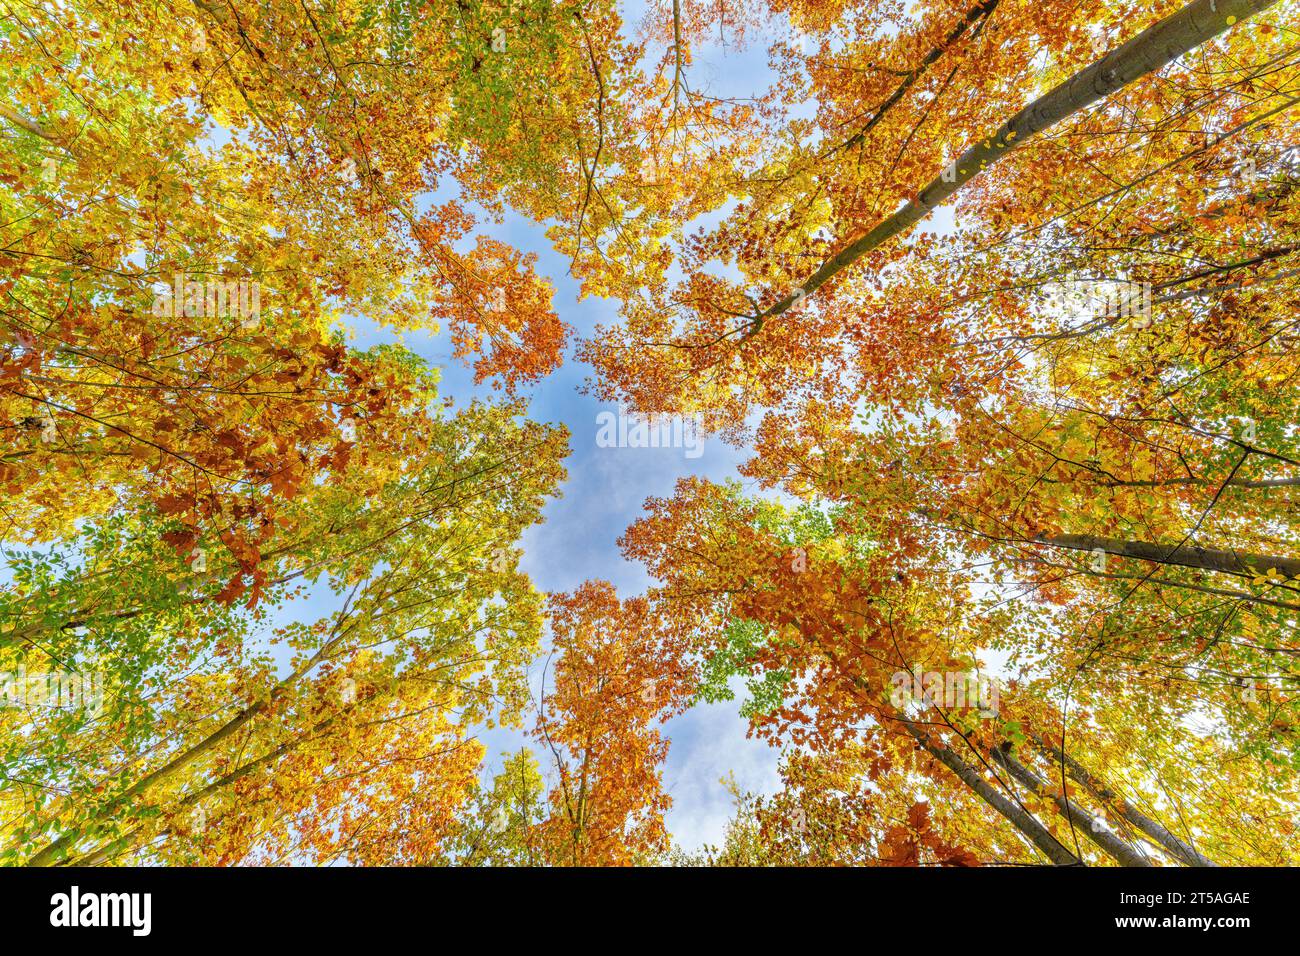 Autumn forest with setting sun shining through leaves and branches. Nature, forestry, Trees, habitat, environment and sustainability concepts, desktop Stock Photo